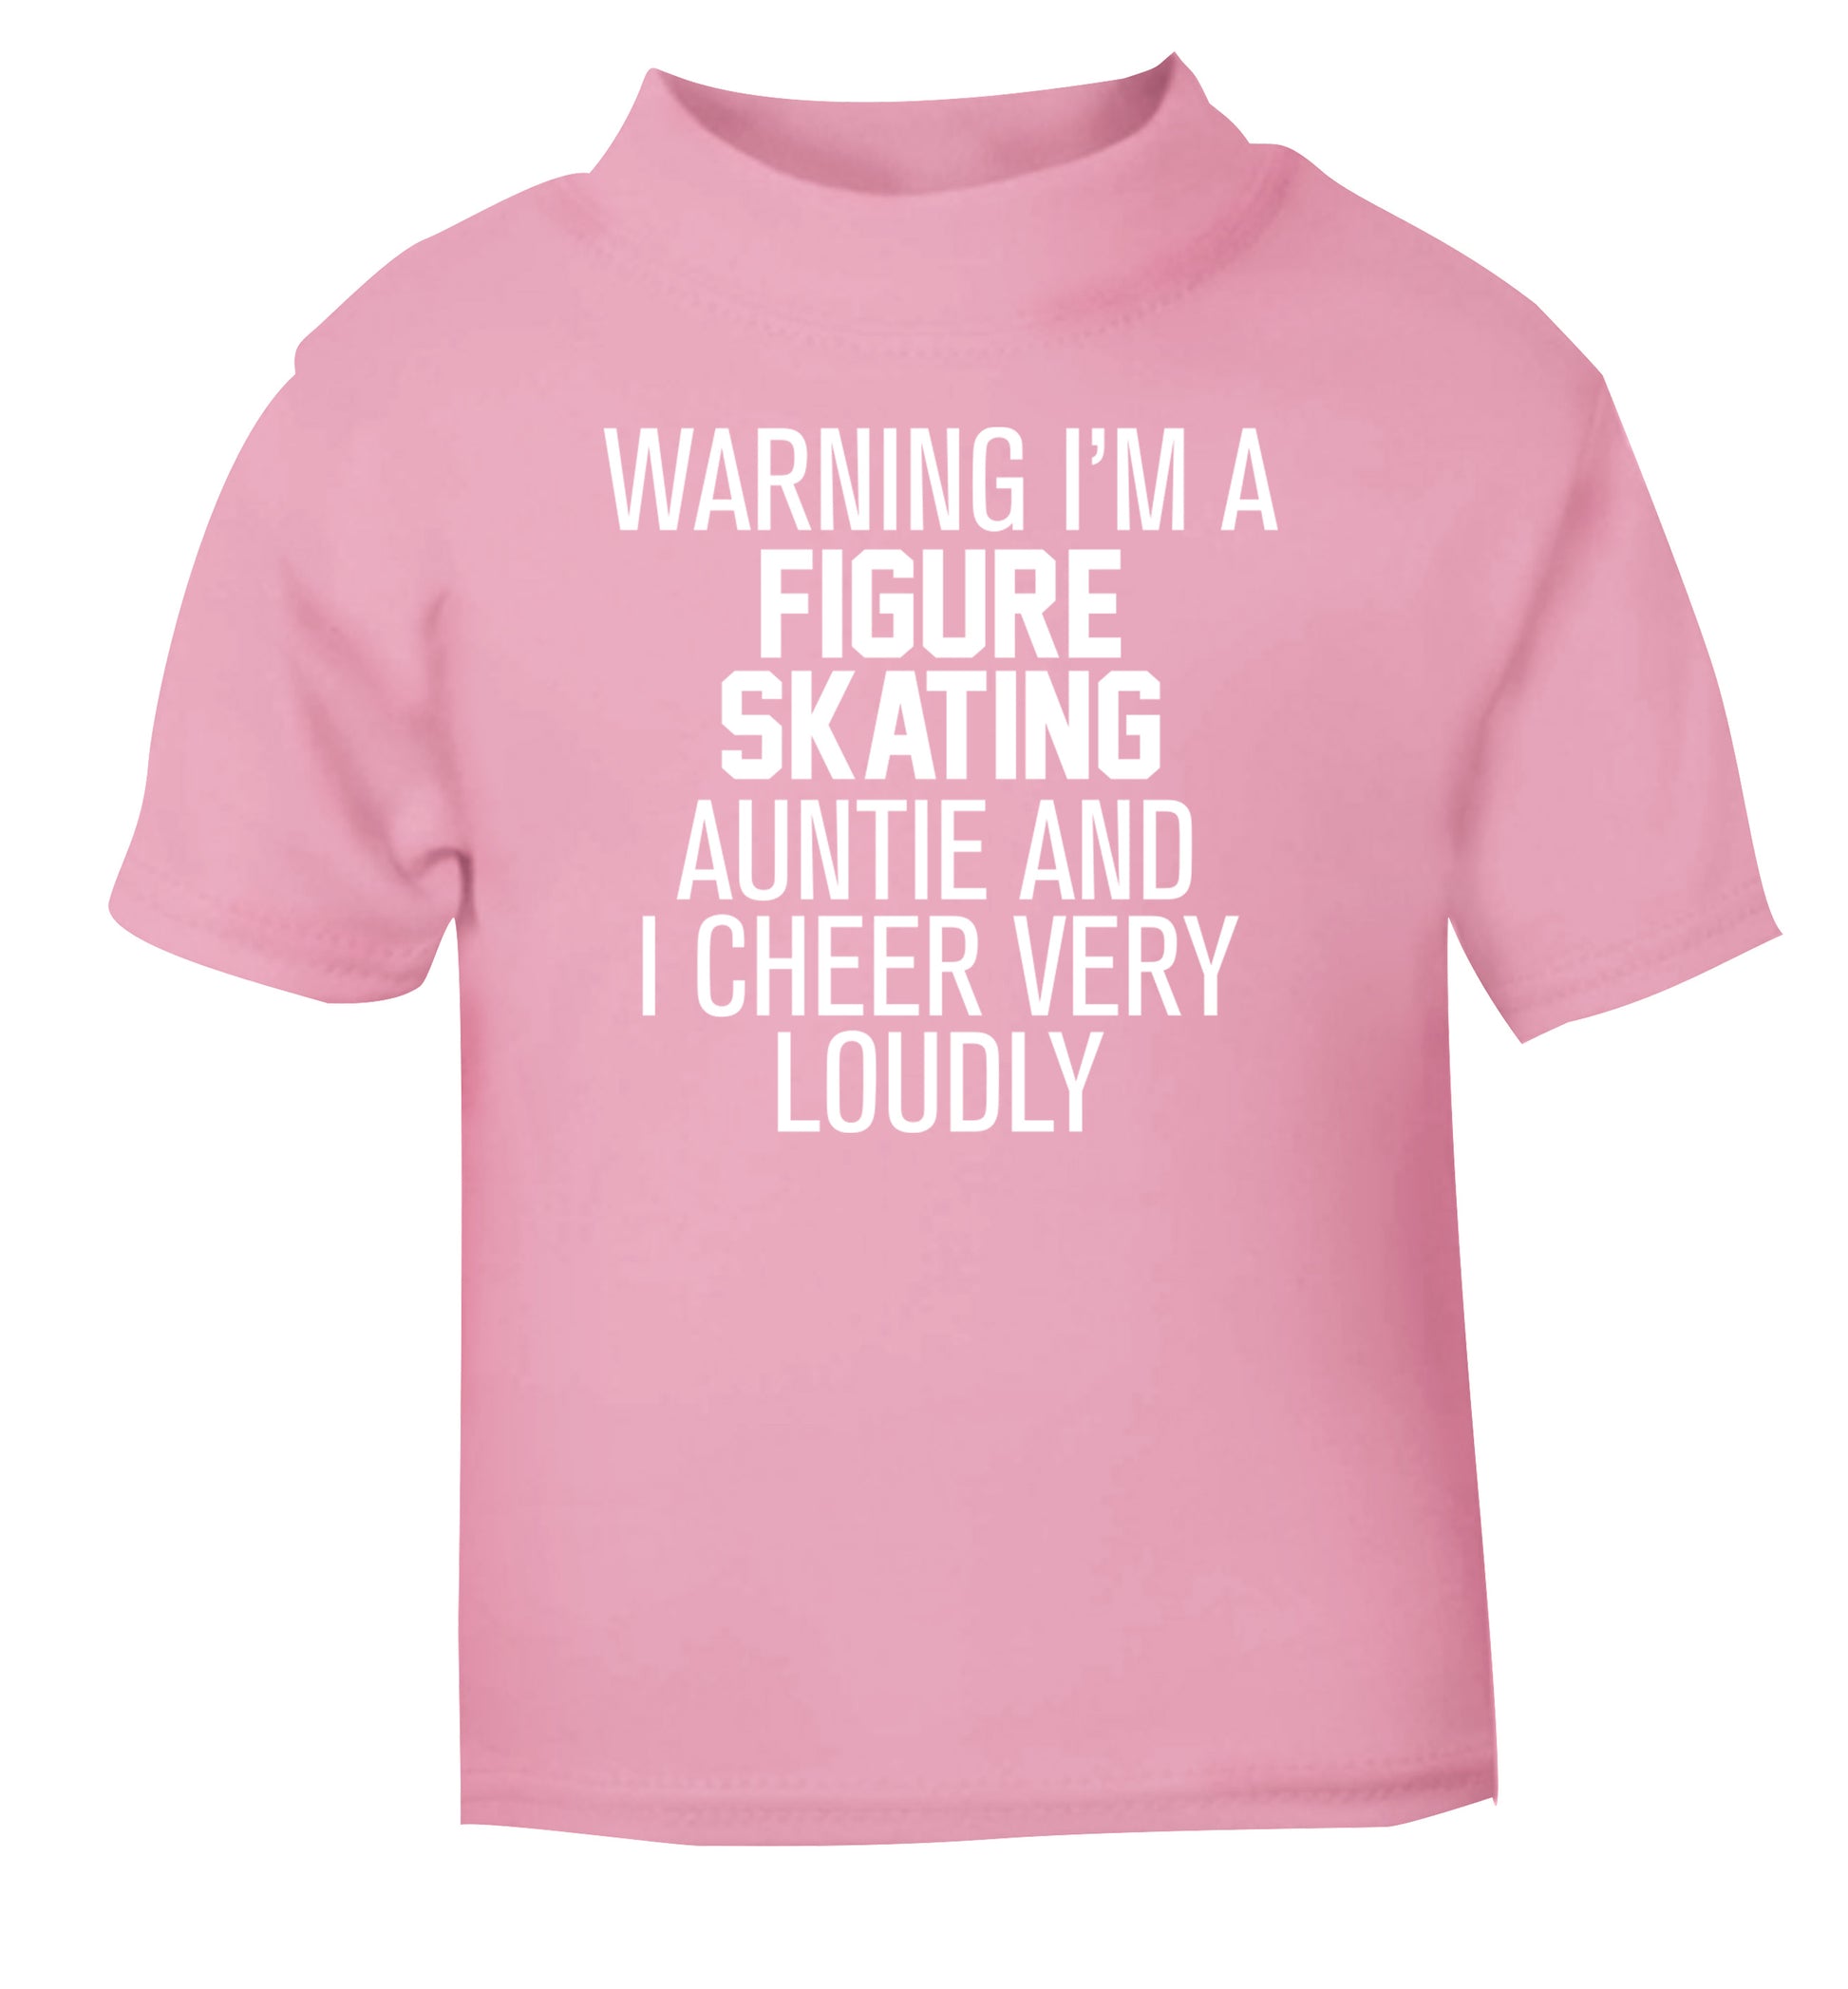 Warning I'm a figure skating auntie and I cheer very loudly light pink Baby Toddler Tshirt 2 Years